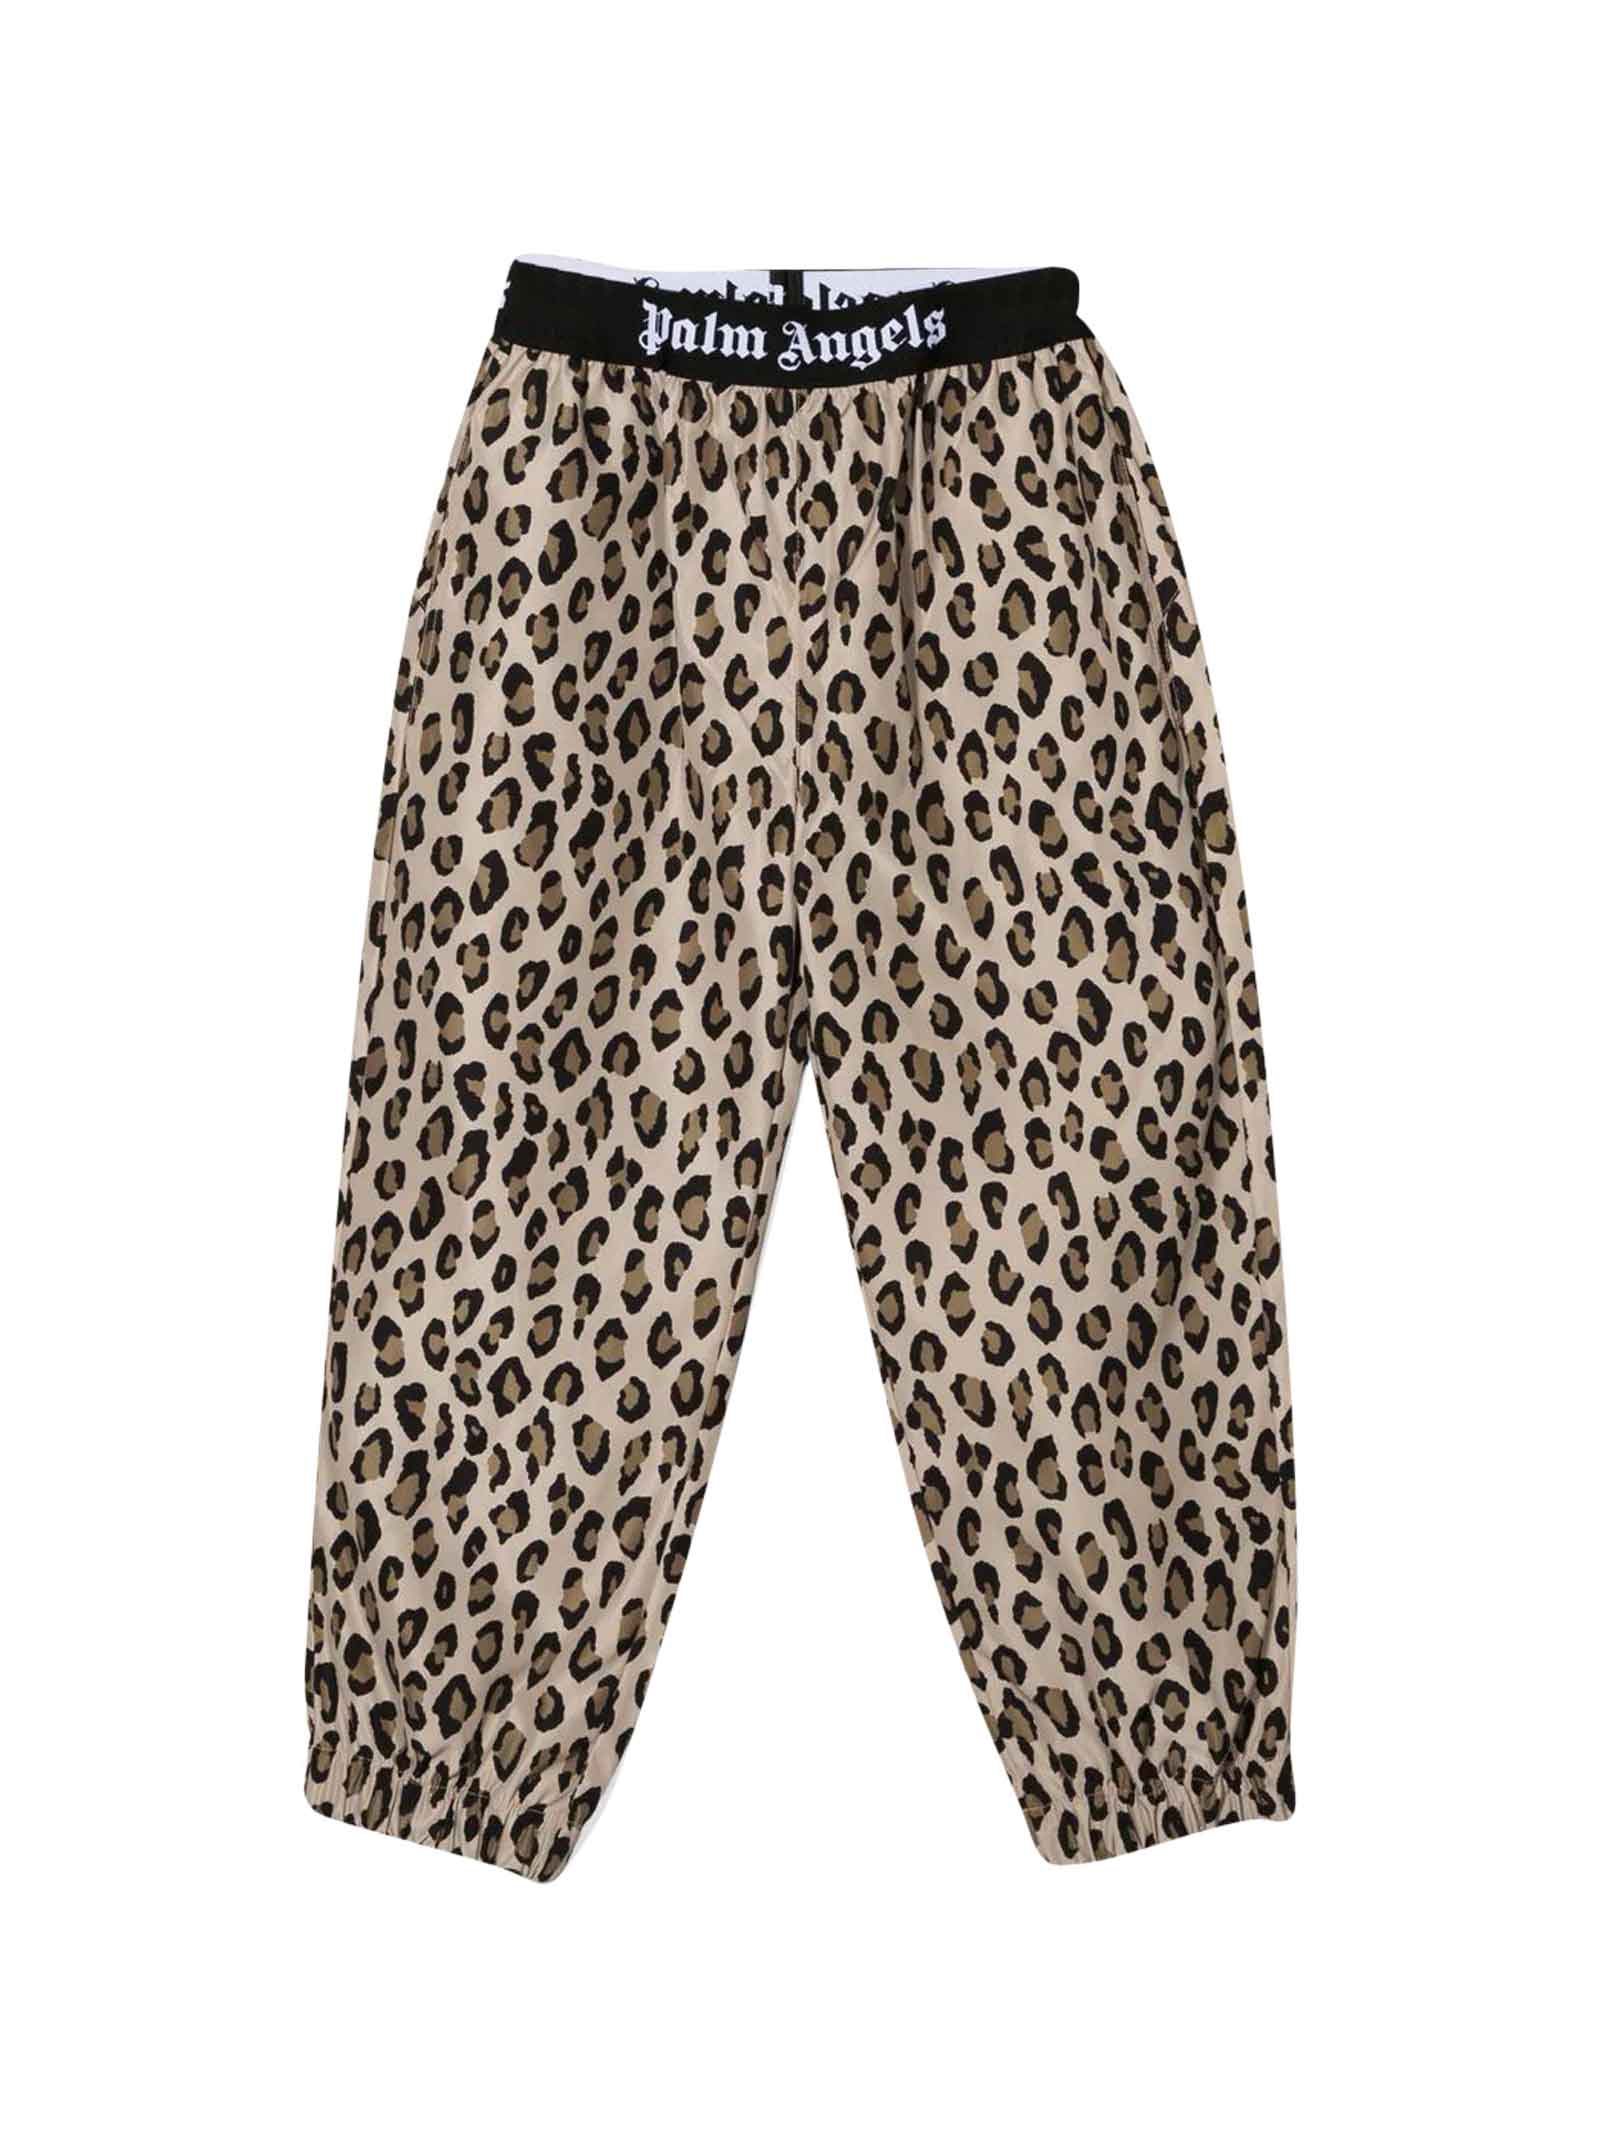 Palm Angels Girl Trousers With Print